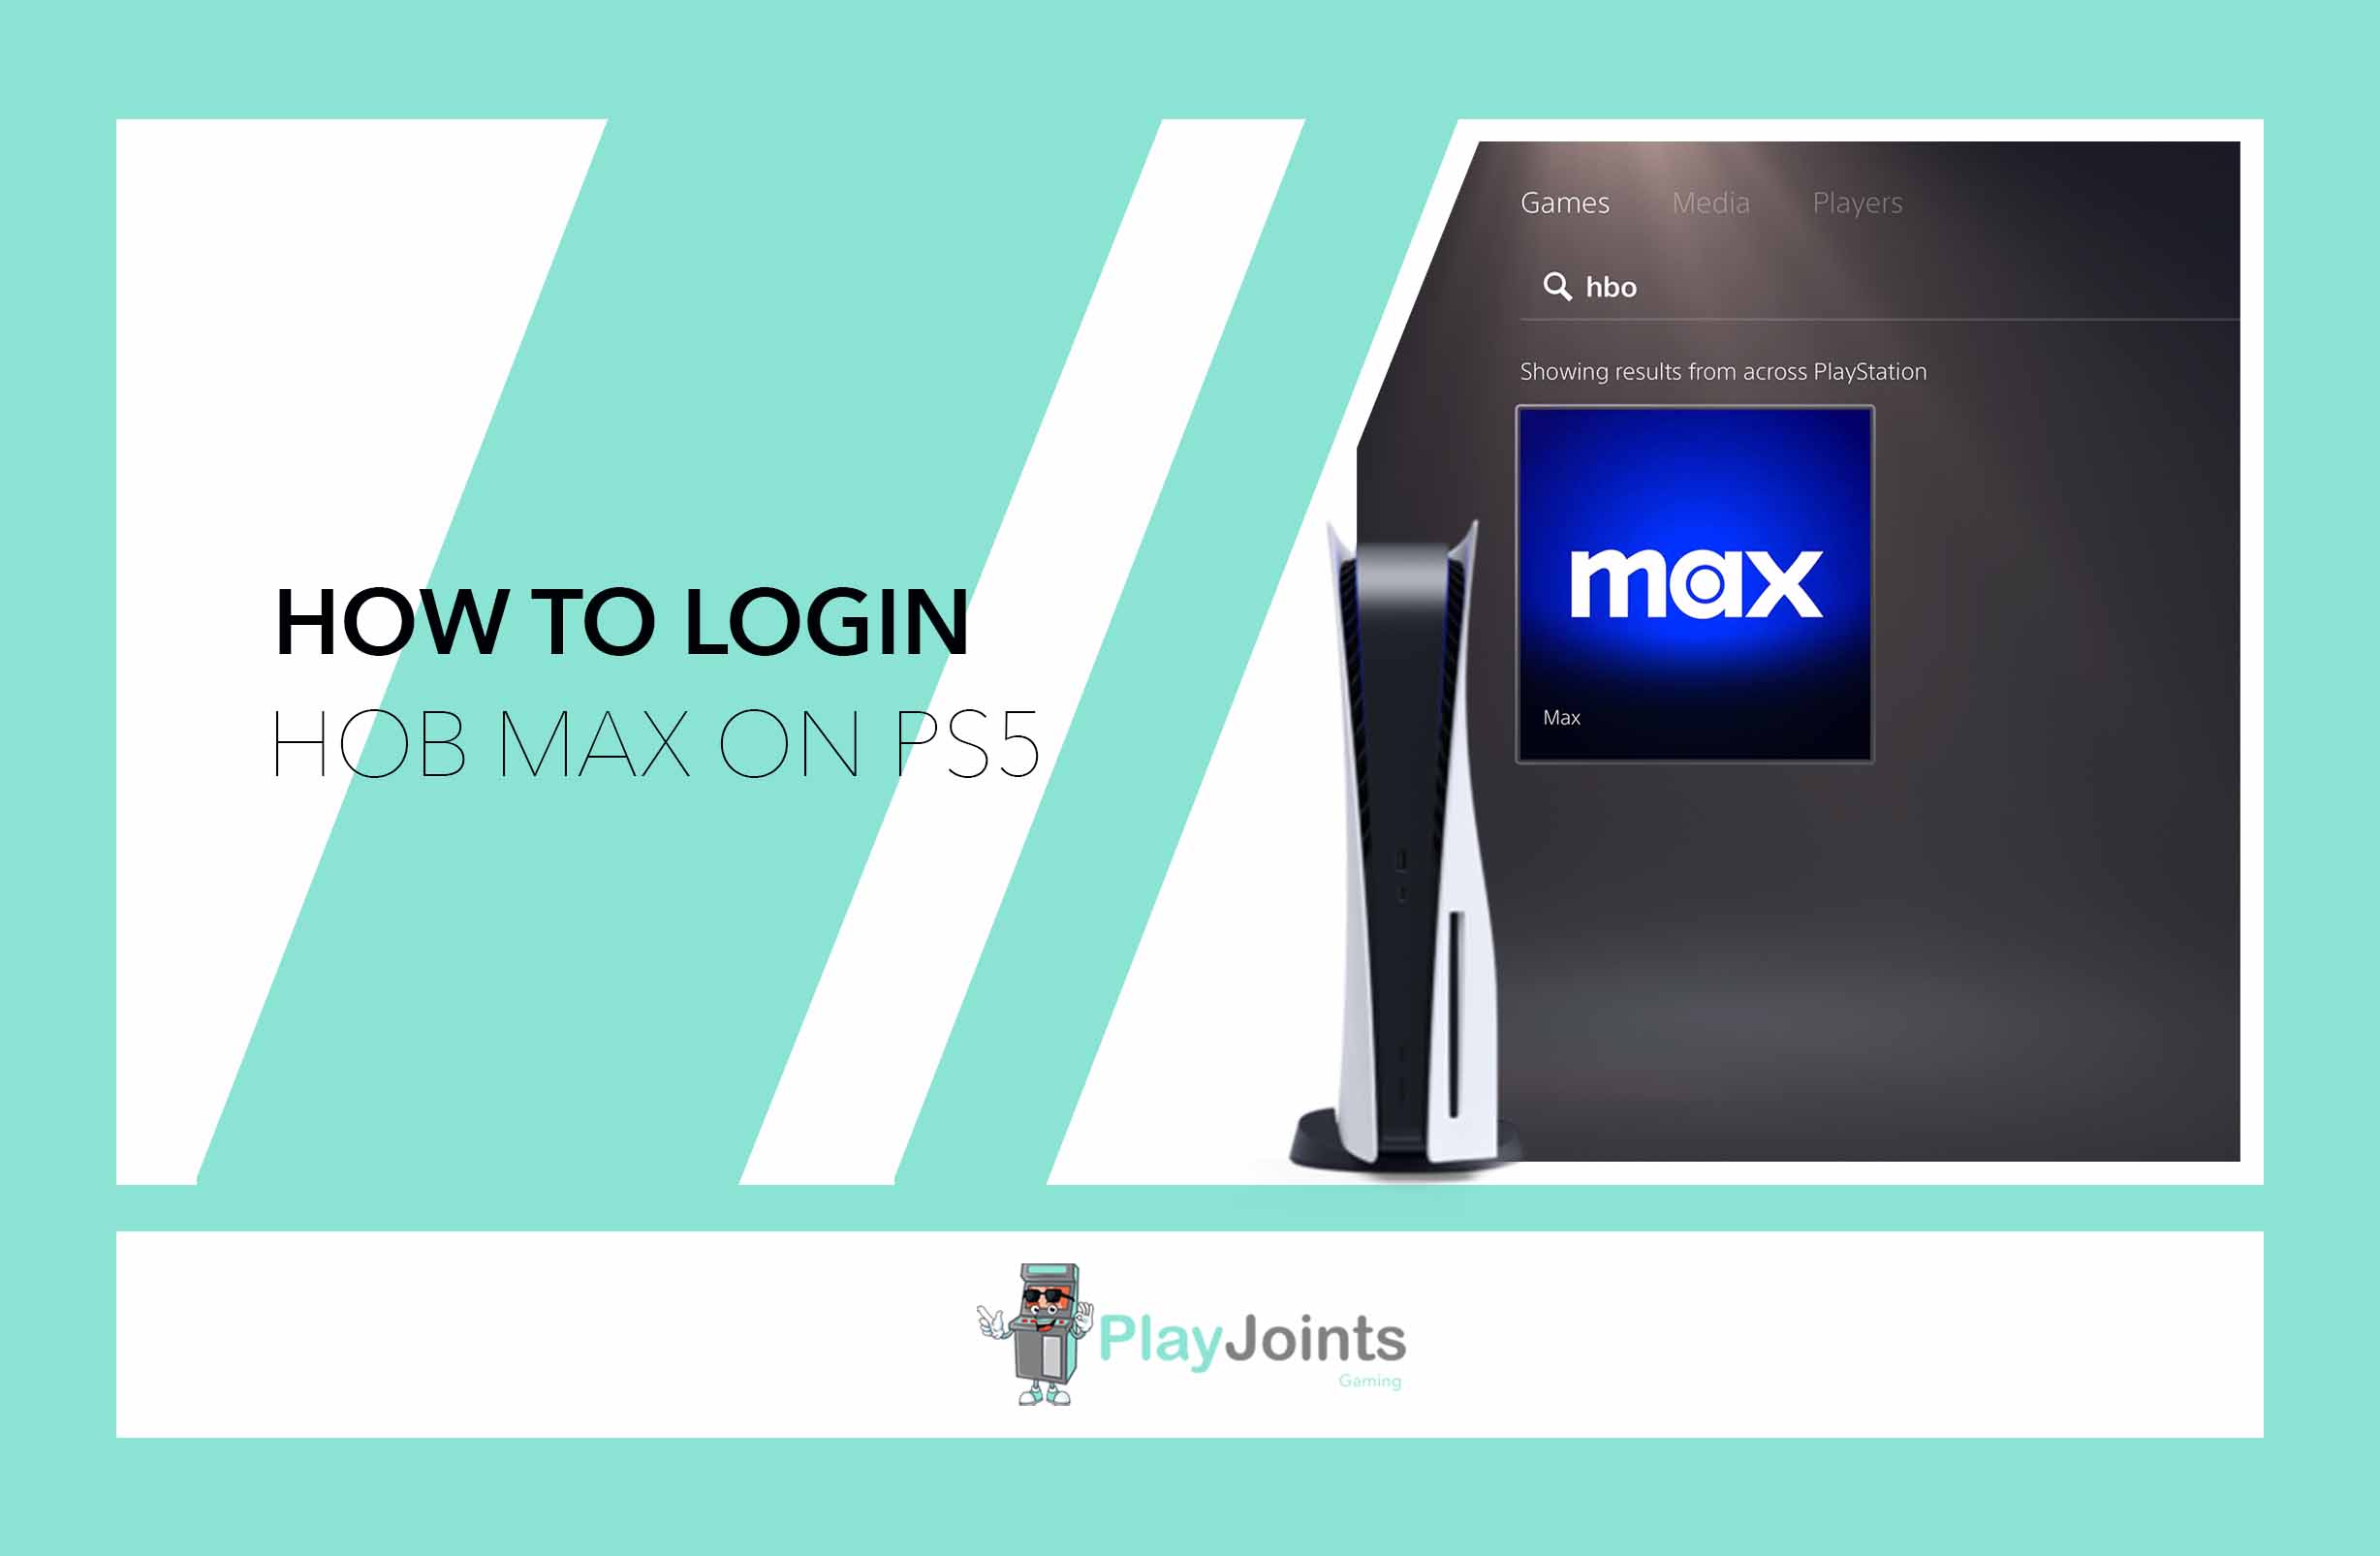 How to Login HBO Max on PS5